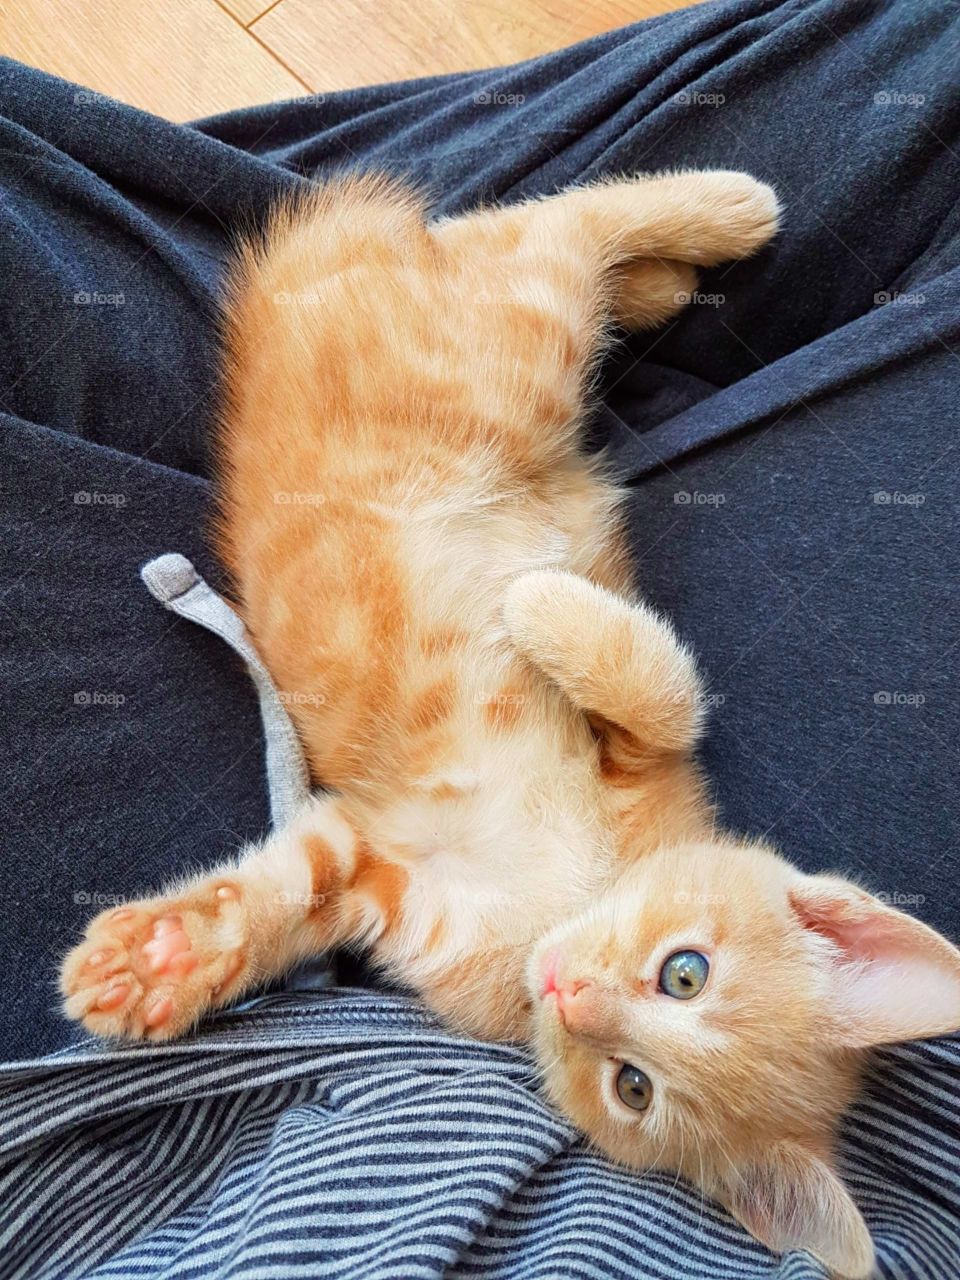 A cute, ginger, blue-eyed kitten 😻

This is Clive 😁 This was him at about 8 weeks old and extremely playful!